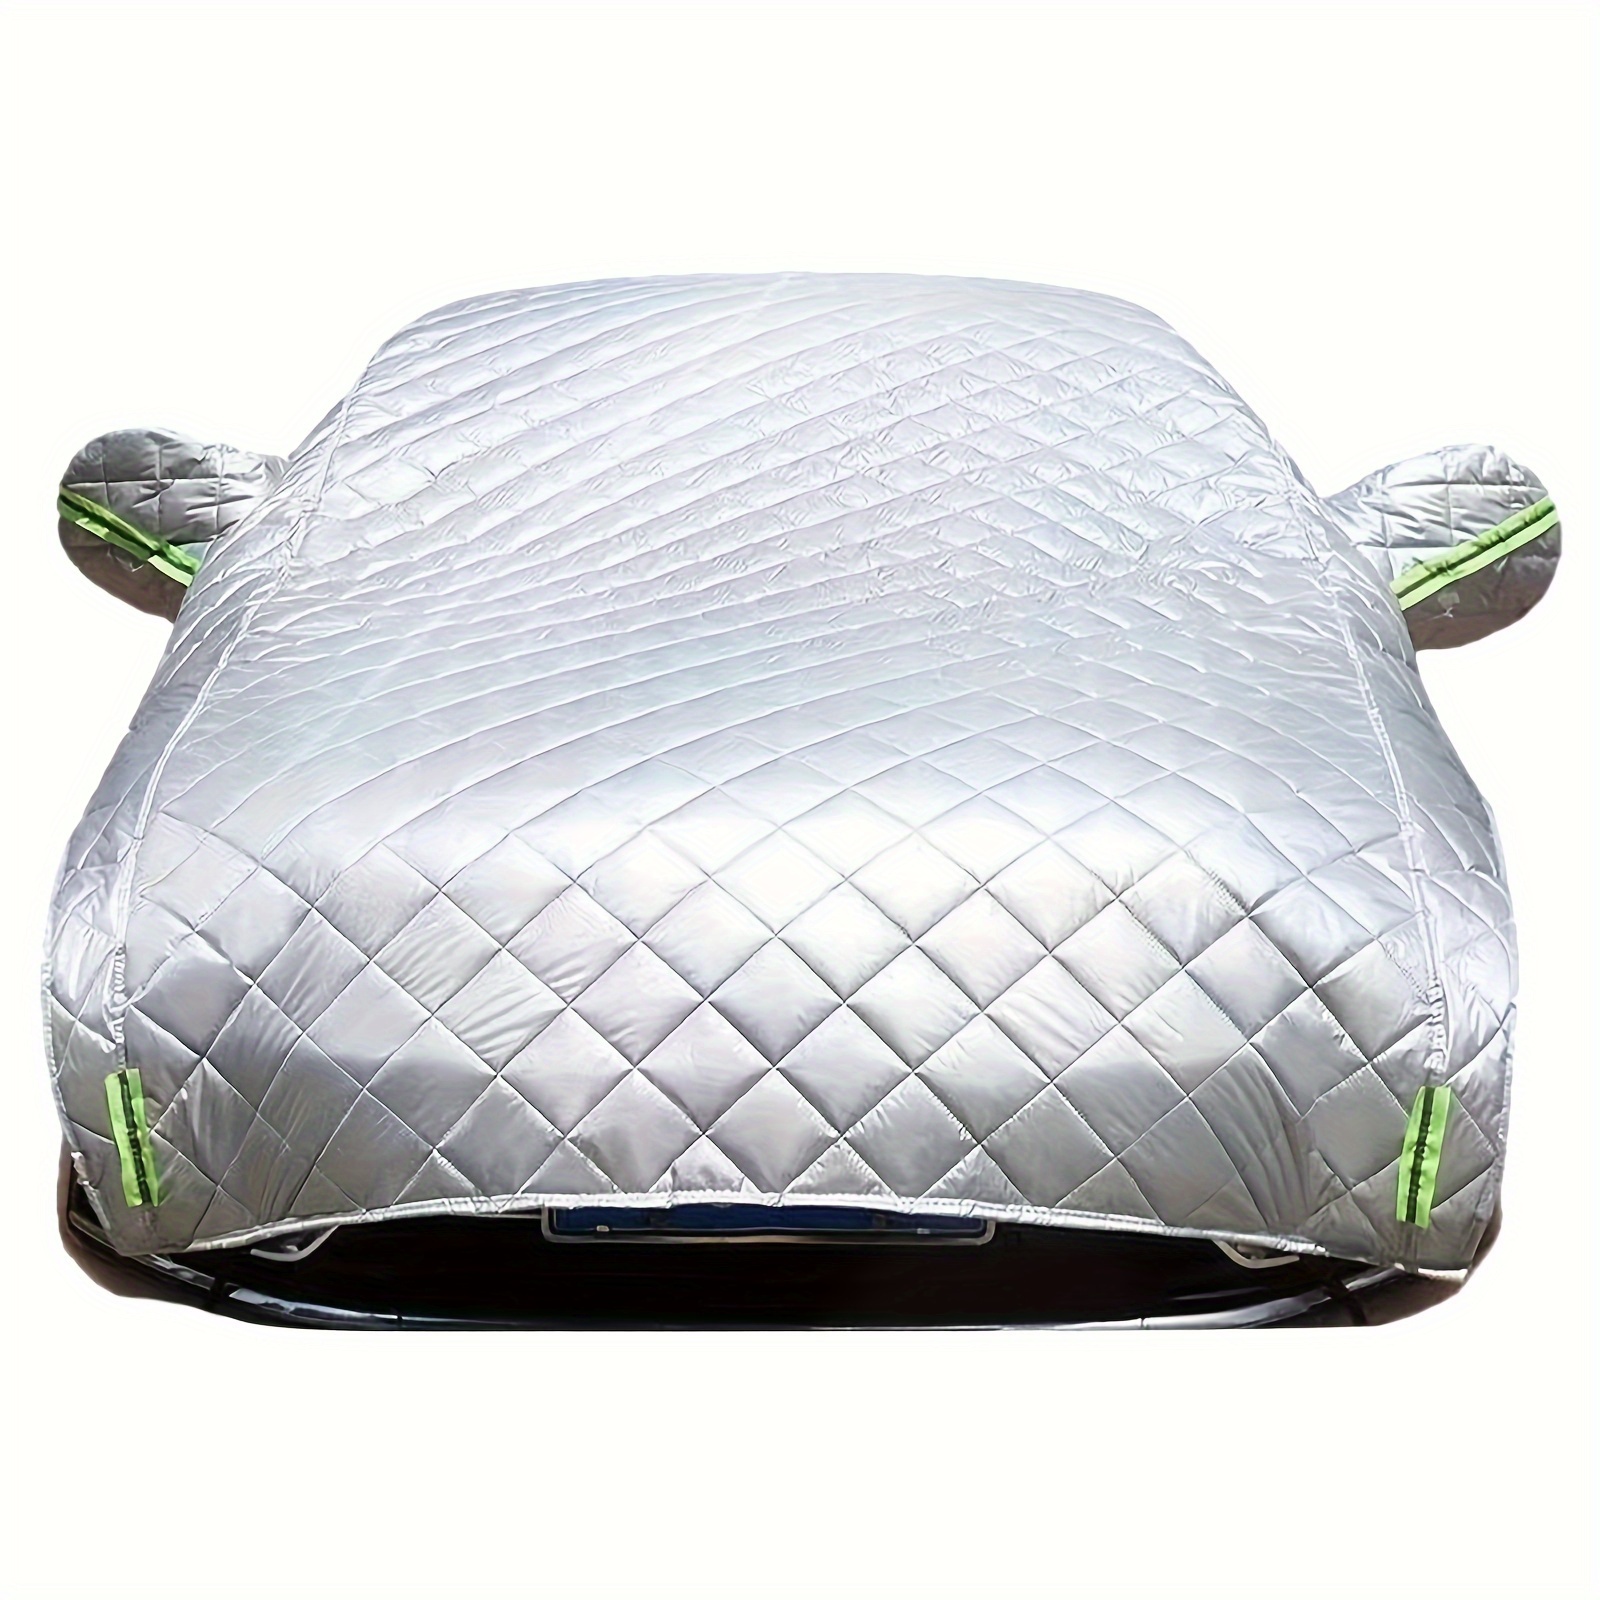 

All-weather Cover - Waterproof, Sun-resistant With Cotton Lining For Sedans & Suvs